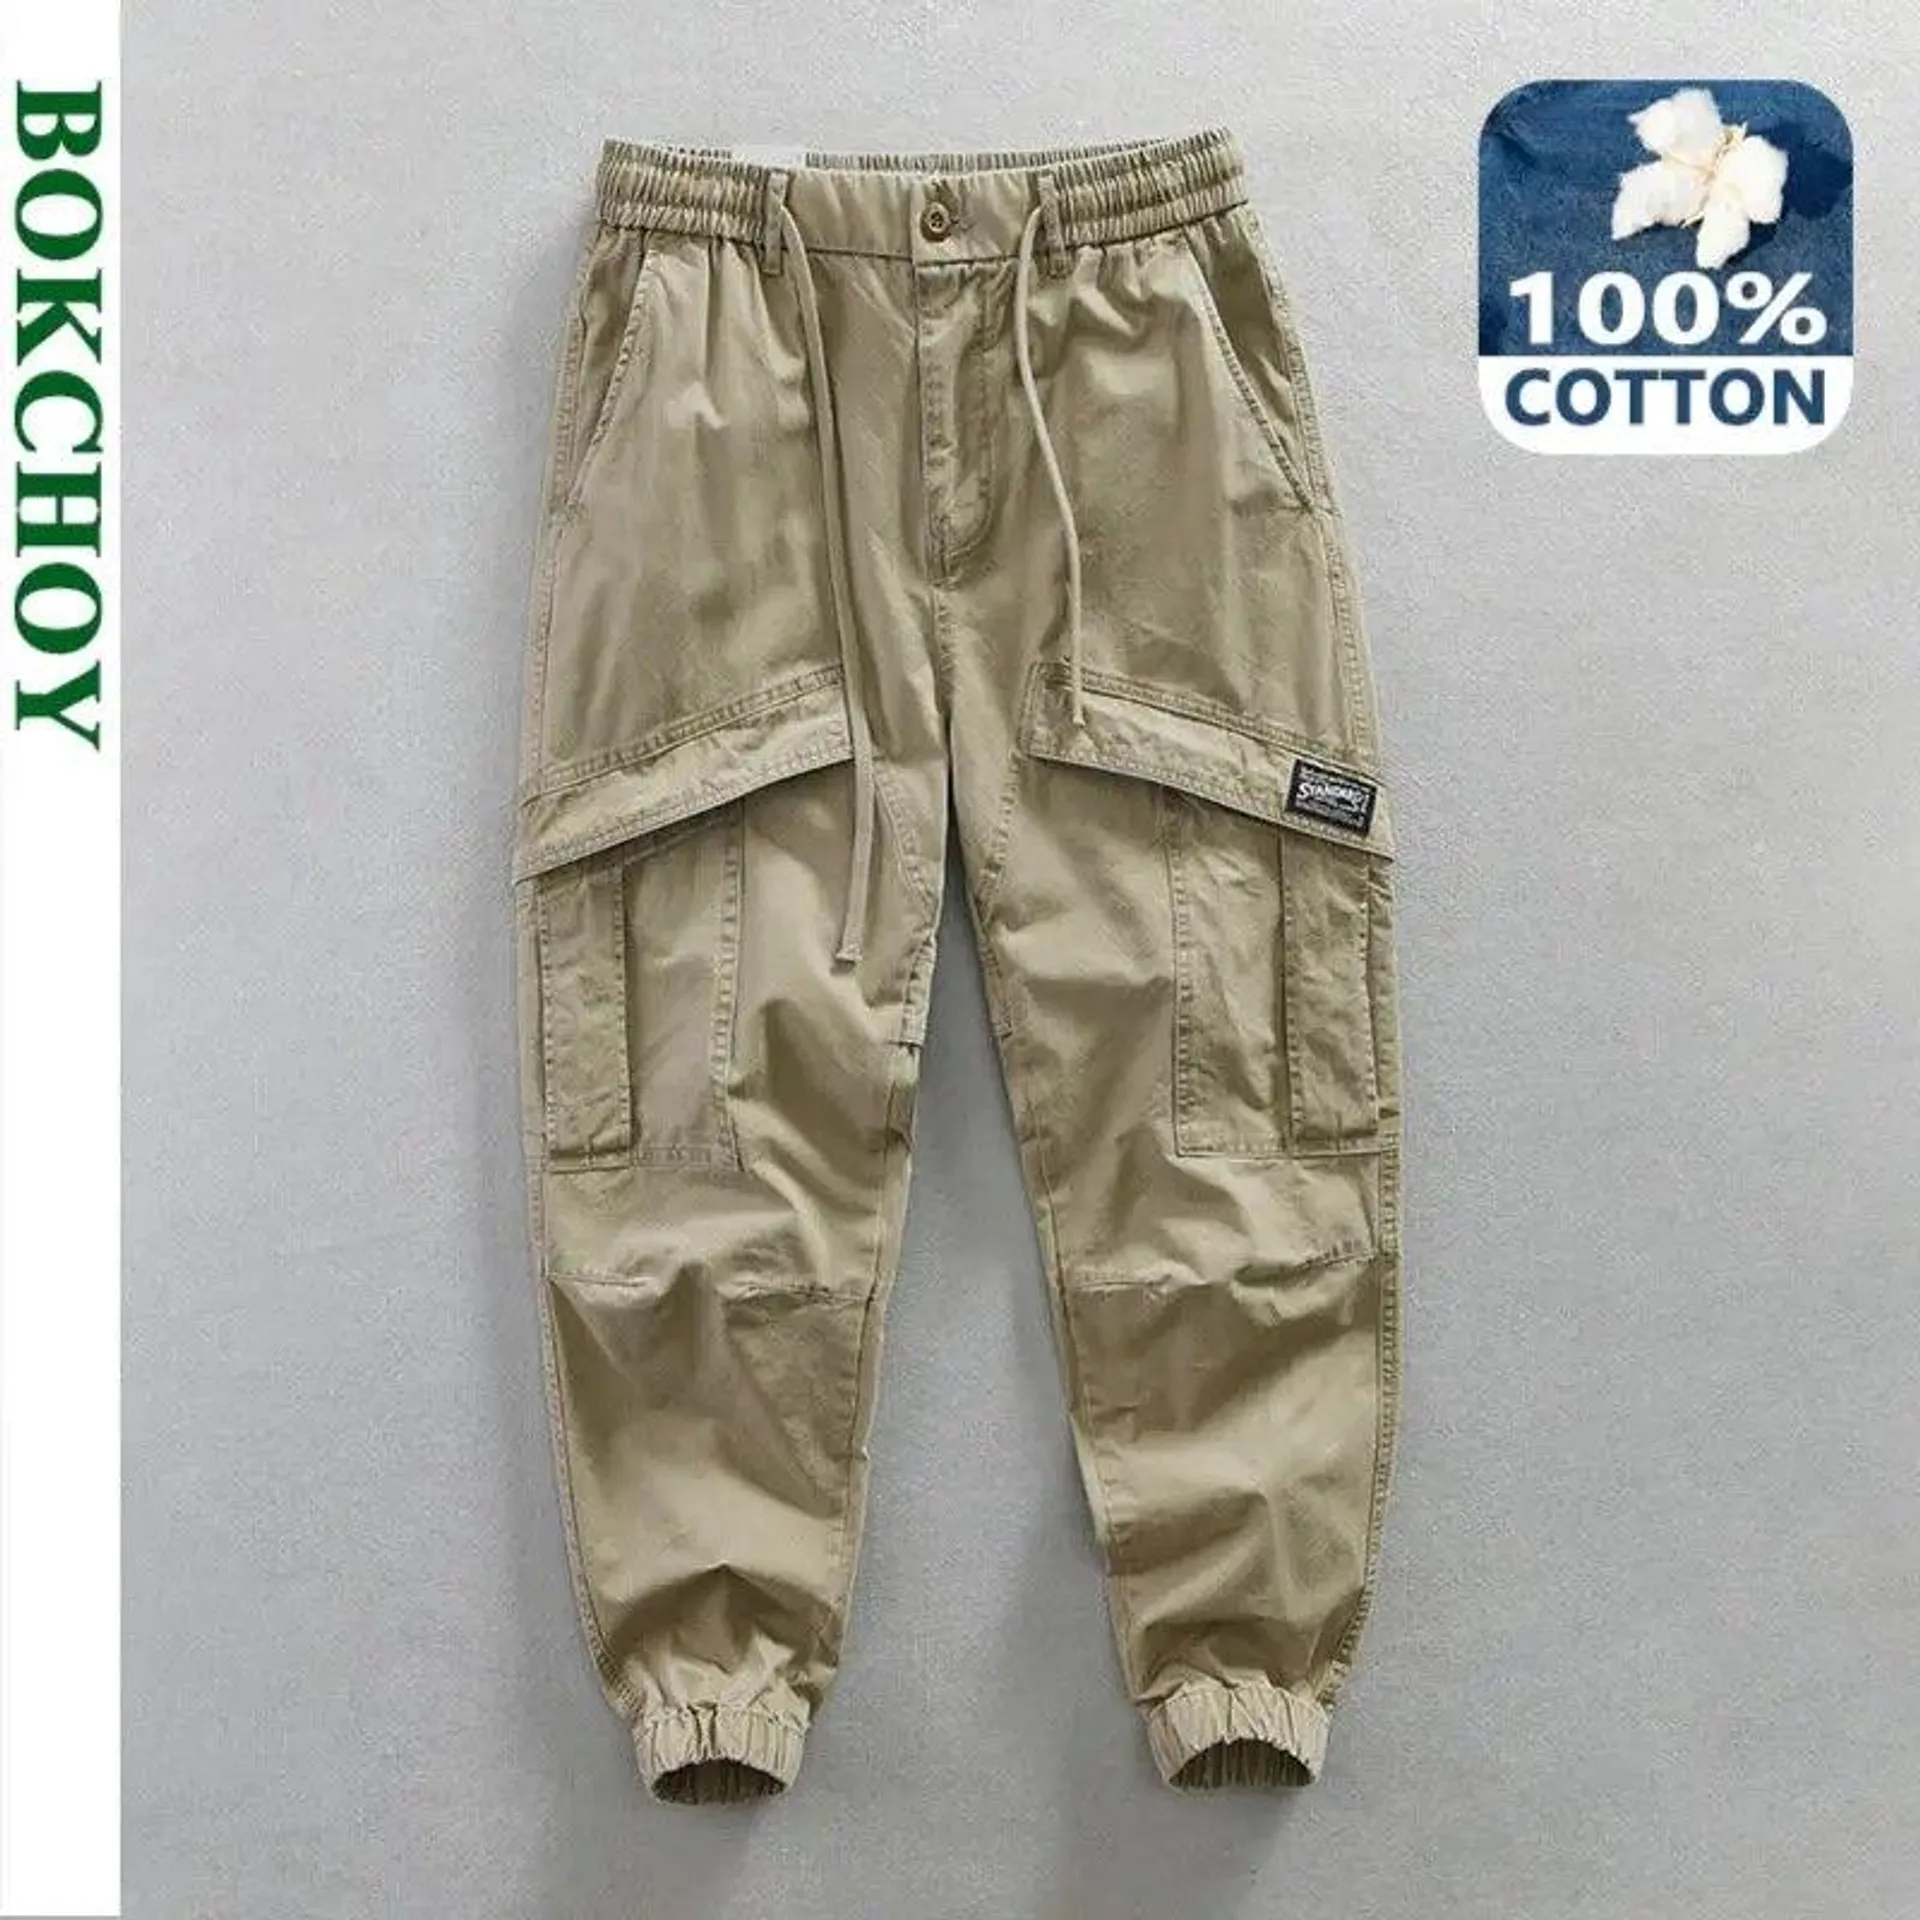 Spring New Casual Cargo Trousers for Men Multi-pockets Pants 100% Cotton Solid Color Loose Oversize Men Clothing AZ615